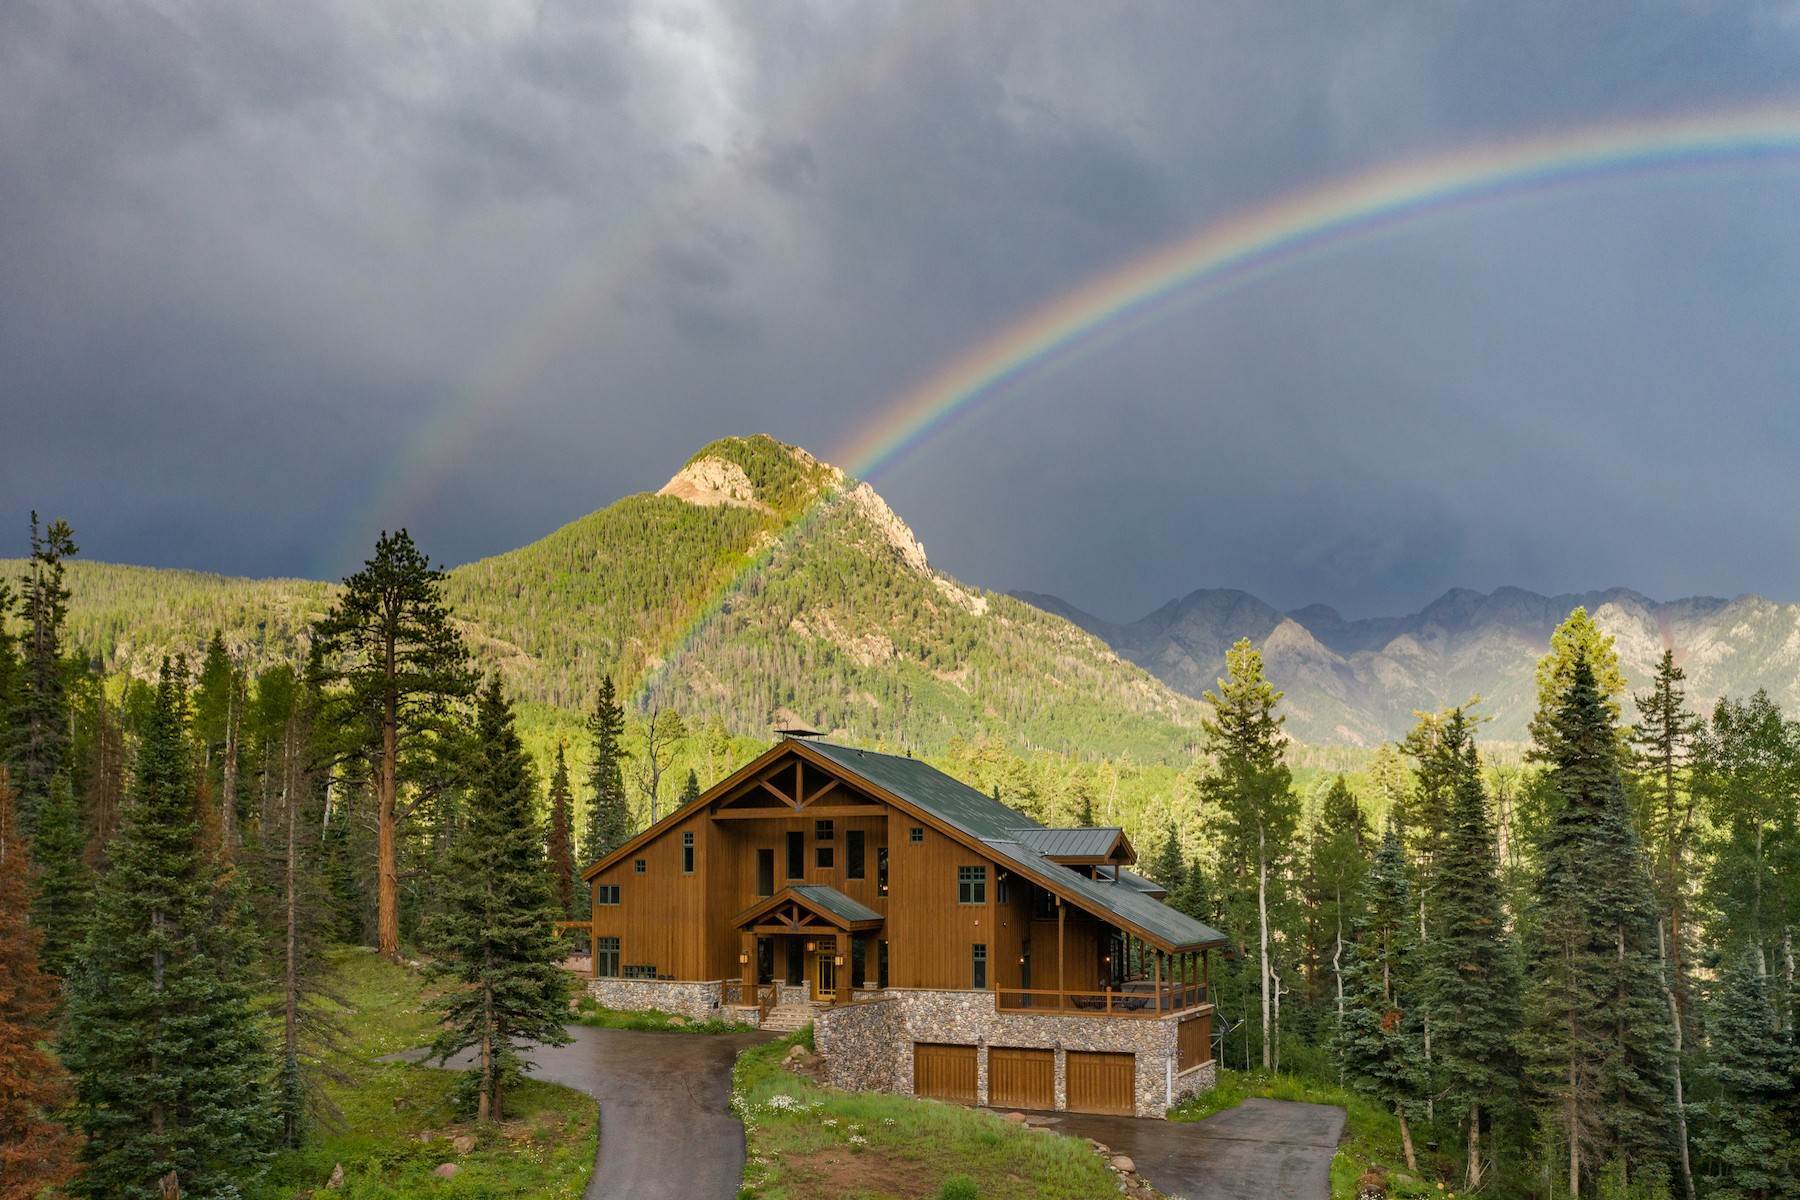 Single Family Homes for Active at Mill Creek Lodge 53072 N HWY 550 Durango, Colorado 81301 United States